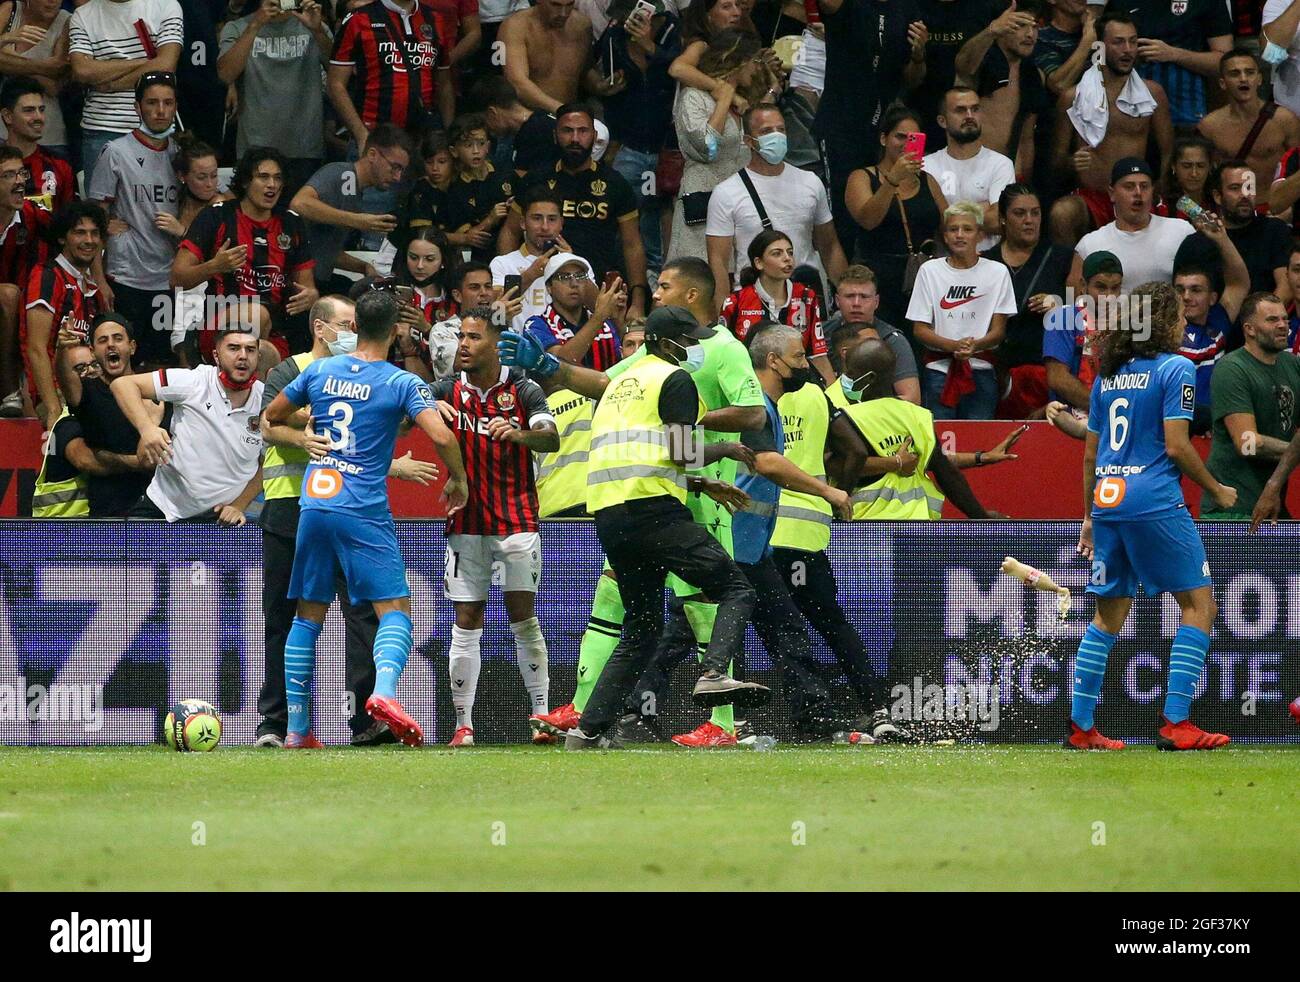 firo: 22.08.2021, football, soccer, LIGUE 1, season 2021/2022, 21/22 French league, OGC Nice (OGCN) - Olympique de Marseille (OM) Incidents between players of Marseille - among them Alvaro Gonzalez of OM - and supporters of OGC Nice who enter the pitch, chaos, storm of the Nice fans, throwing attacks of the Nice fans versus players from Marseille who throw back Our terms and conditions apply, can be viewed at www.firosportphoto.de, ONLY FOR USE IN GERMANY !!!!!! Photo: DPPI, copyright by firo sportphoto: Coesfelder Str. 207 D-48249 DvÂºlmen www.firosportphoto.de mail@firosportphoto.de Account Stock Photo